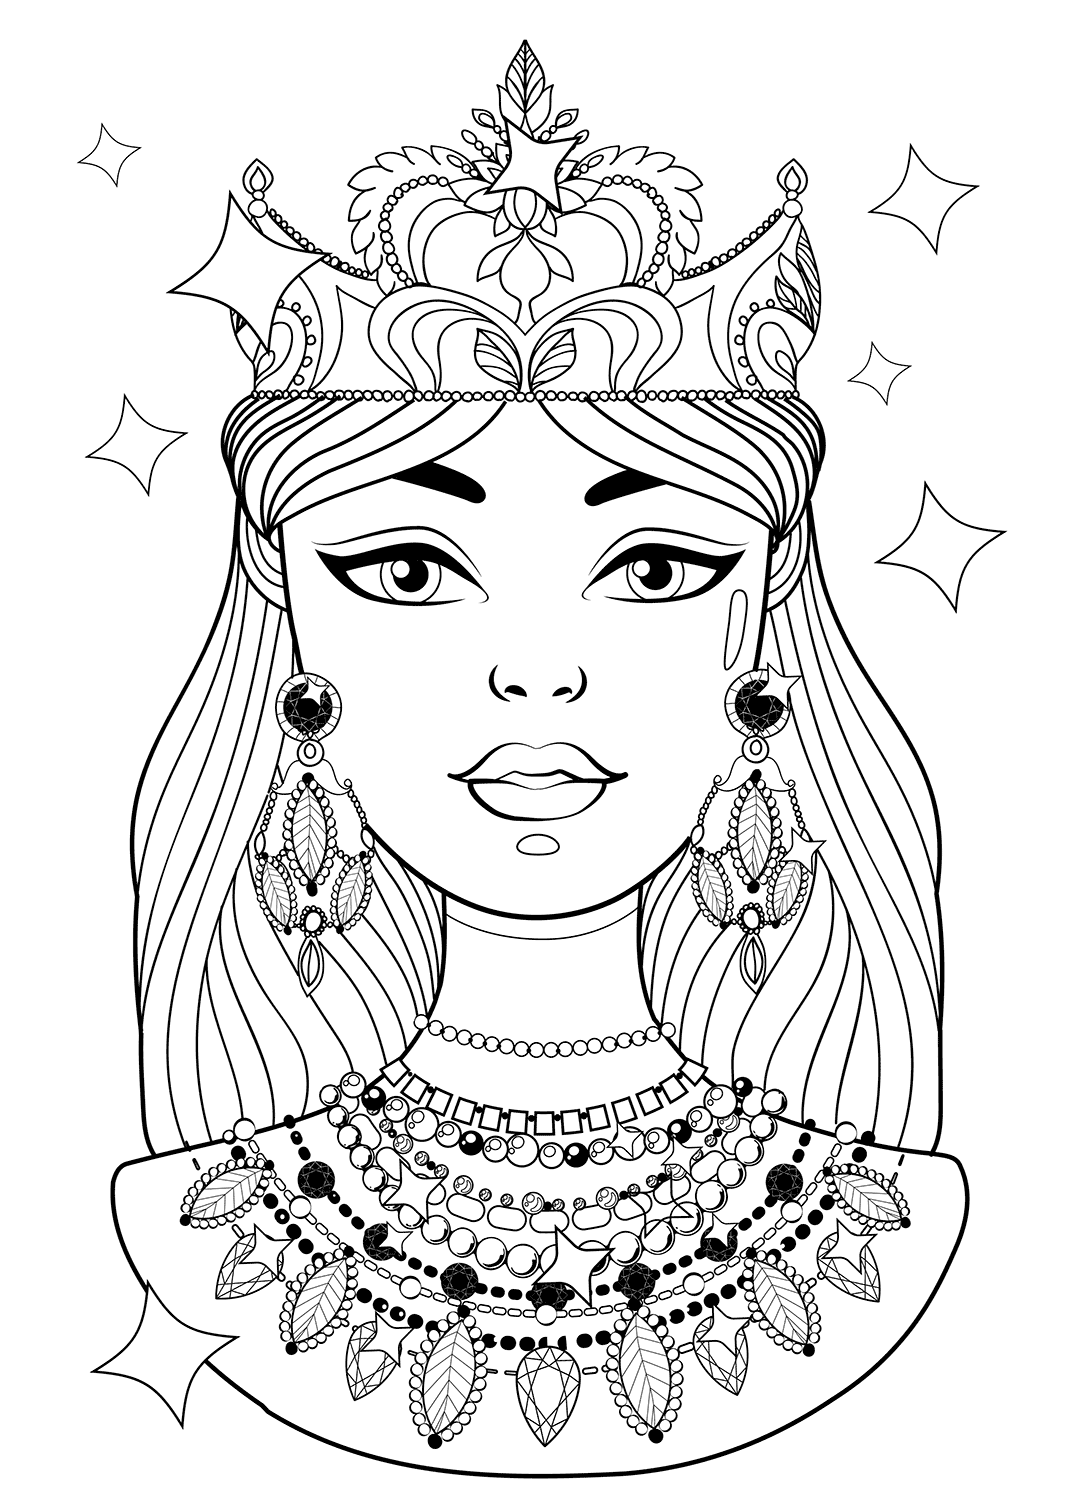 Shining Princess With Necklaces Coloring Page